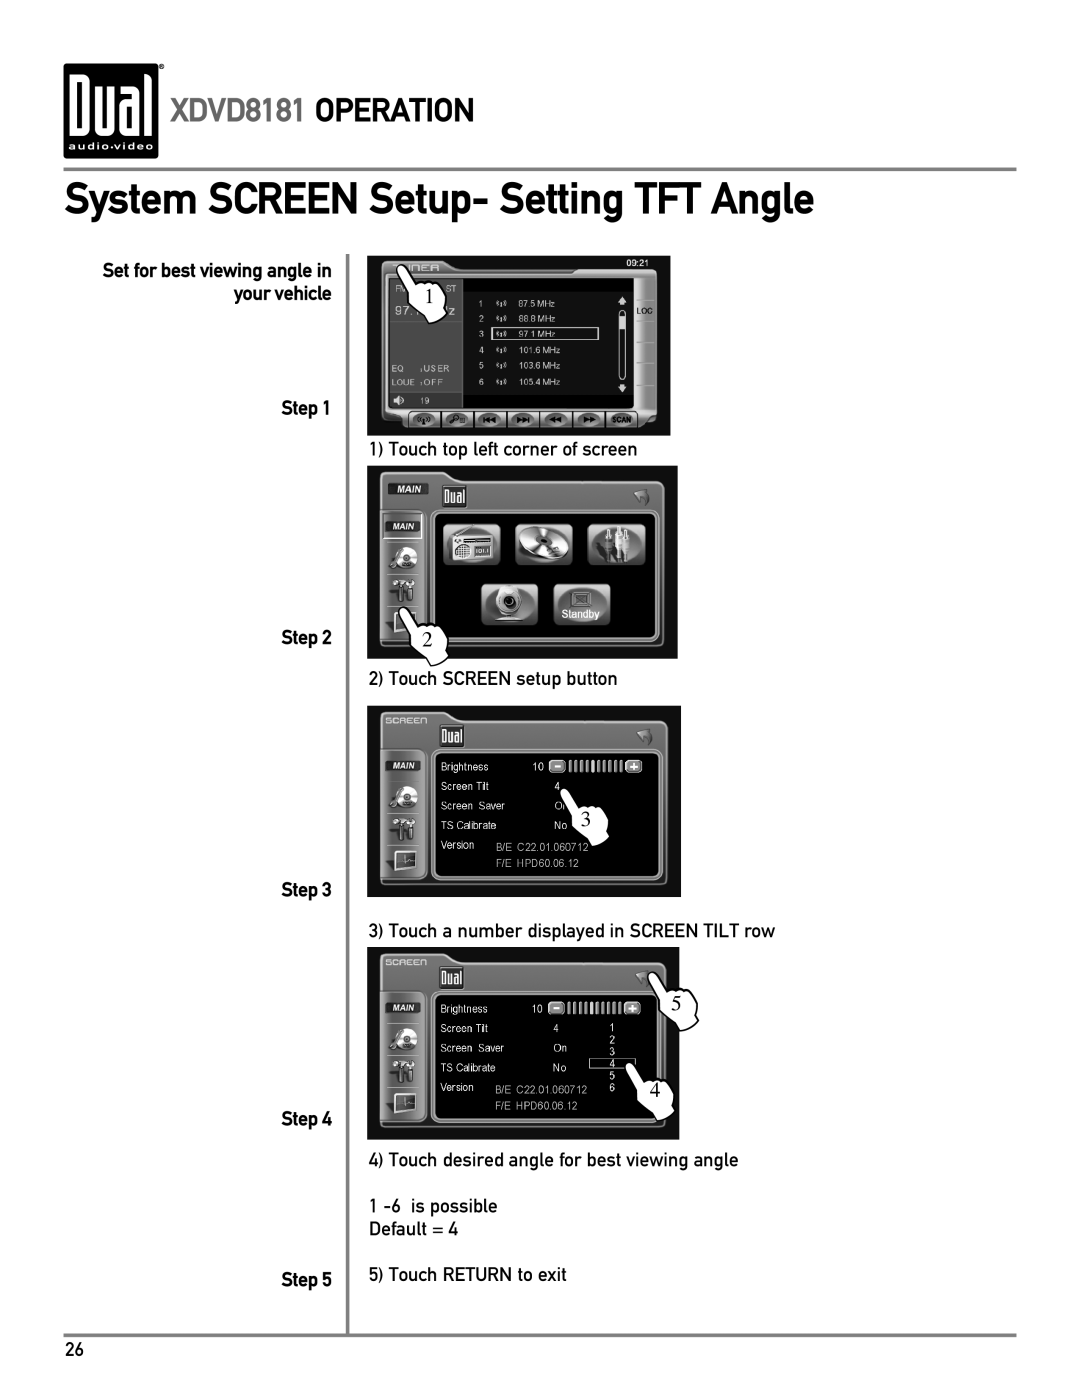 Dual owner manual System SCREEN Setup- Setting TFT Angle, L5 L4, XDVD8181 OPERATION, Step Step Step Step Step 